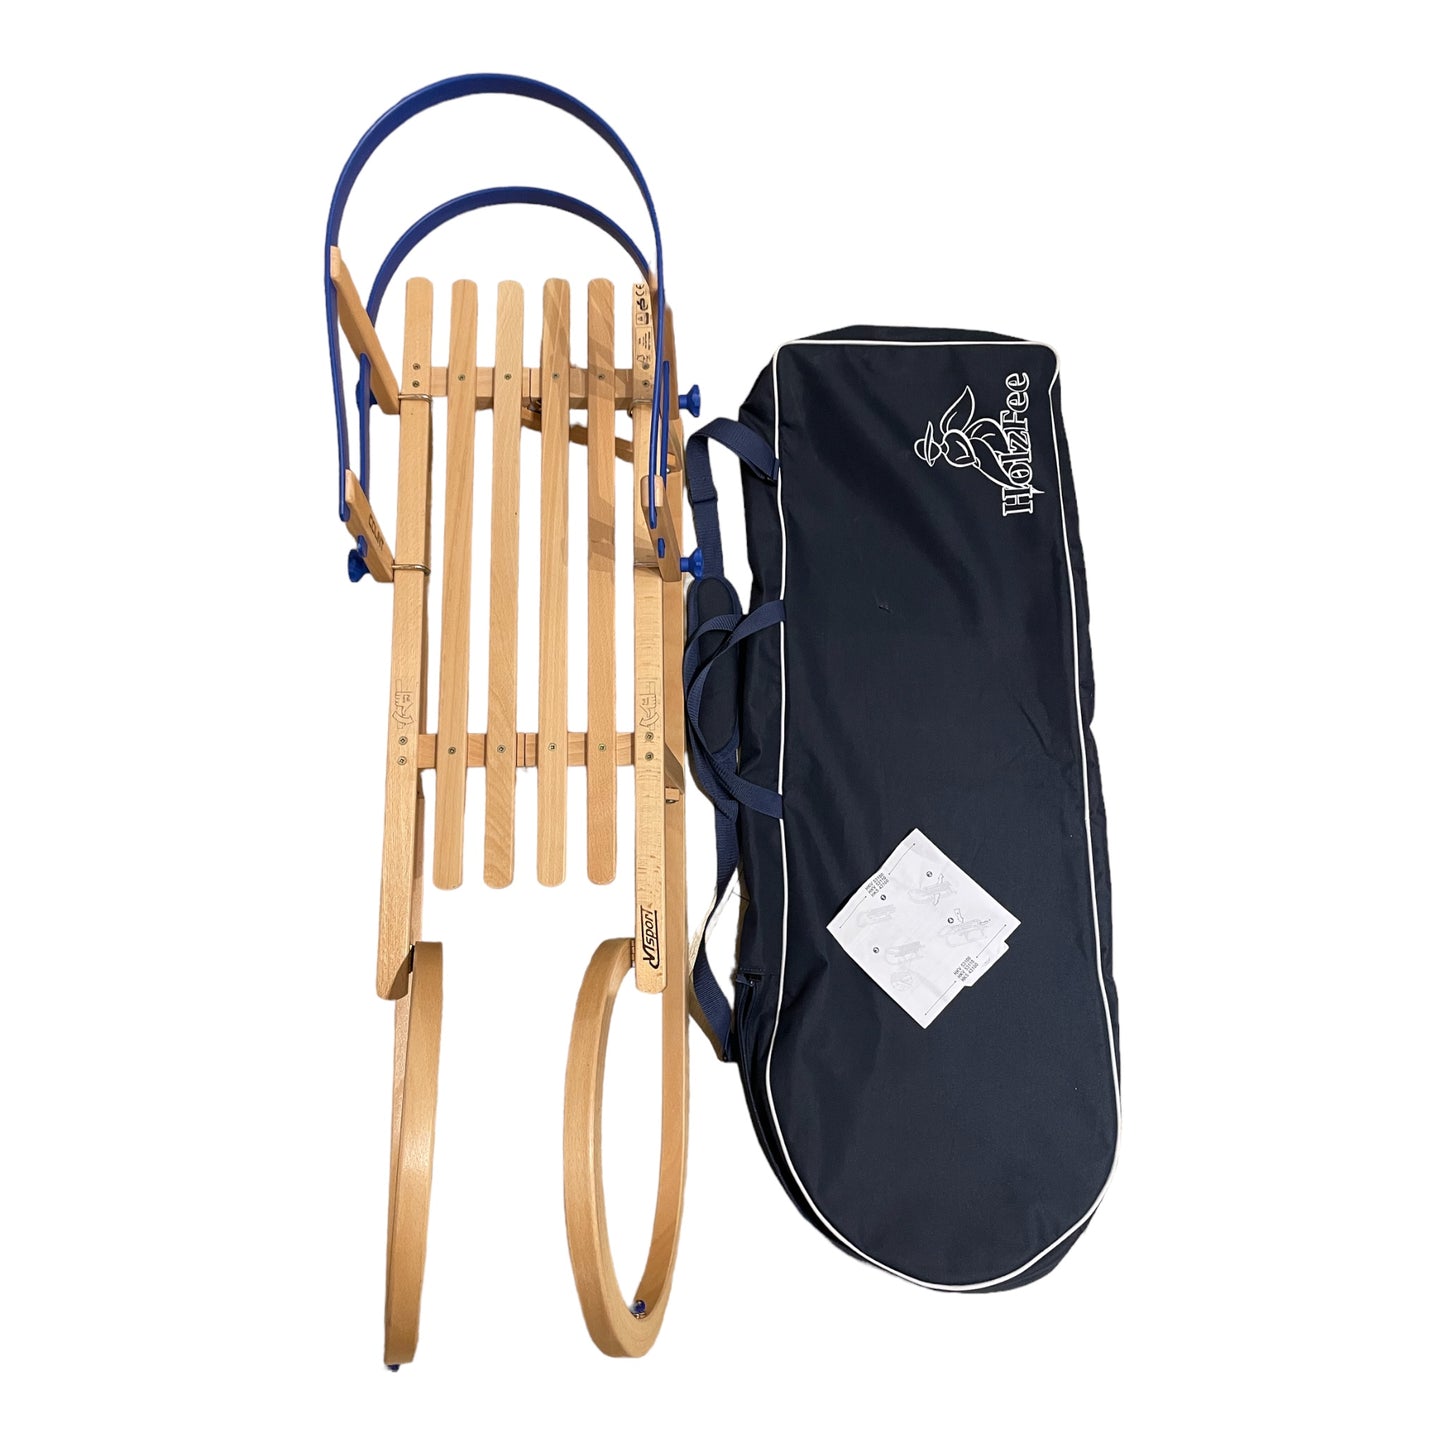 Folding sled Tourer Davos 110 with slatted seat and backrest Blue. With bag to store it in.